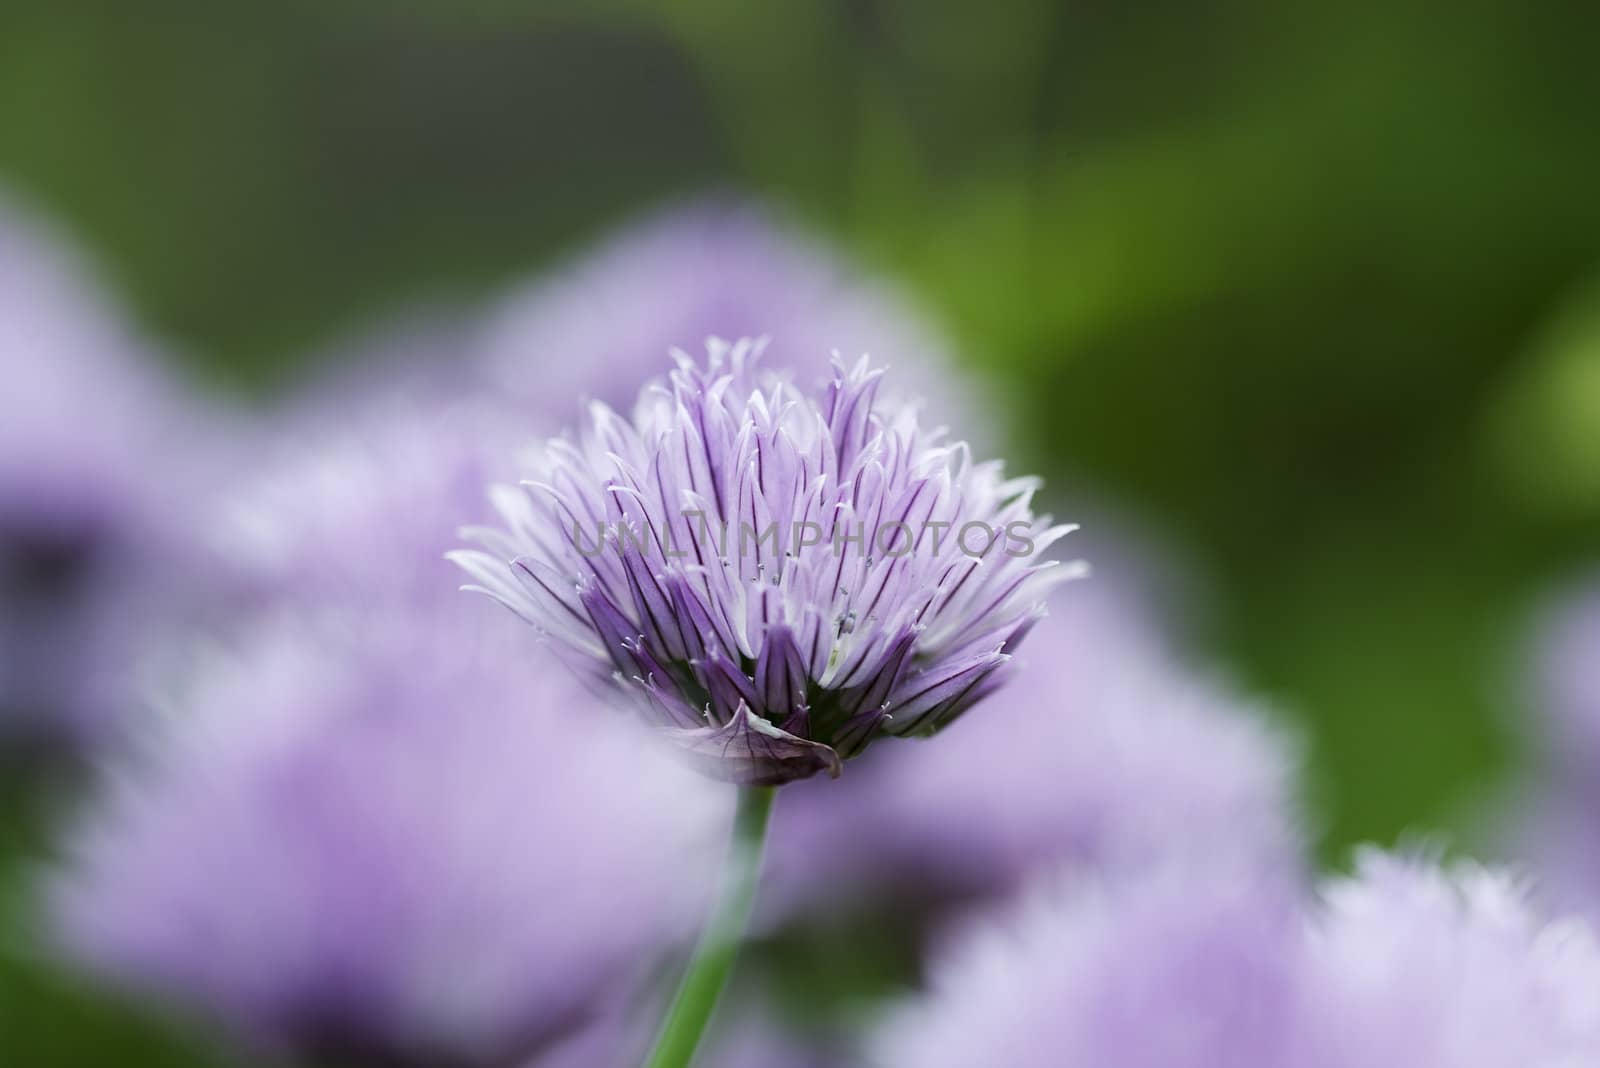 Chives decorative flowers close up